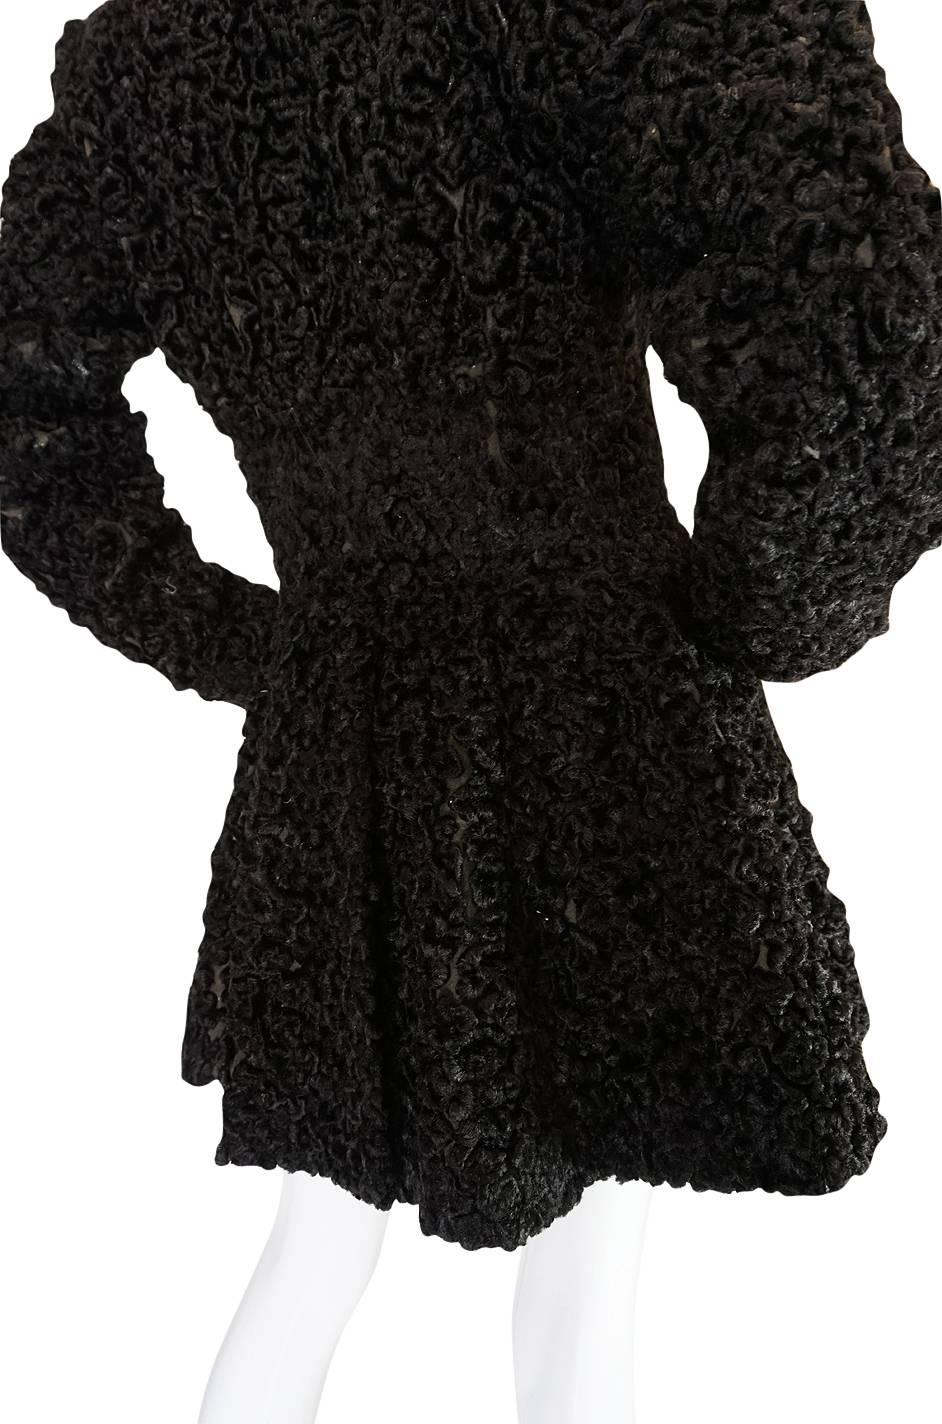 Women's Important Fall 1991 Collection Alaia 'Astrakhan' Faux Fur Coat